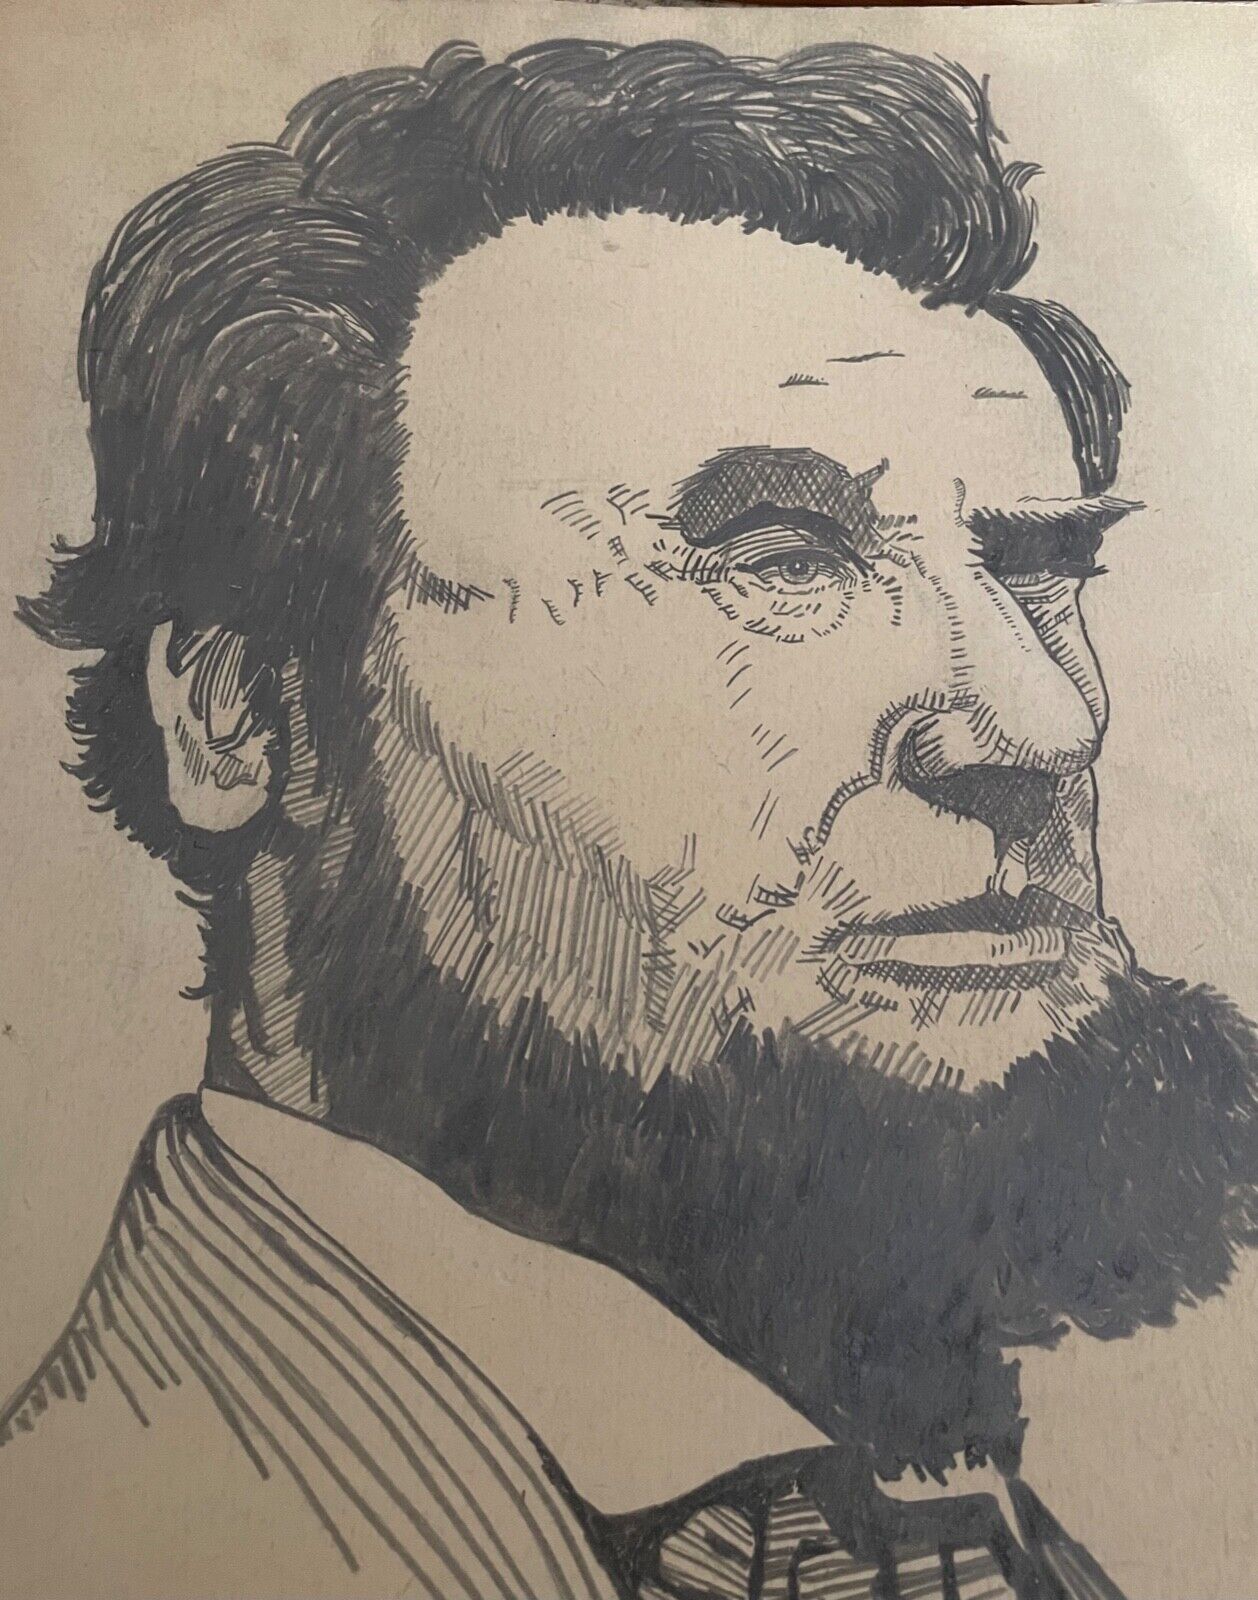 ABRAHAM LINCOLN PENCIL PORTRAIT ~ Abe Lincoln by Frank Keephe ~ President